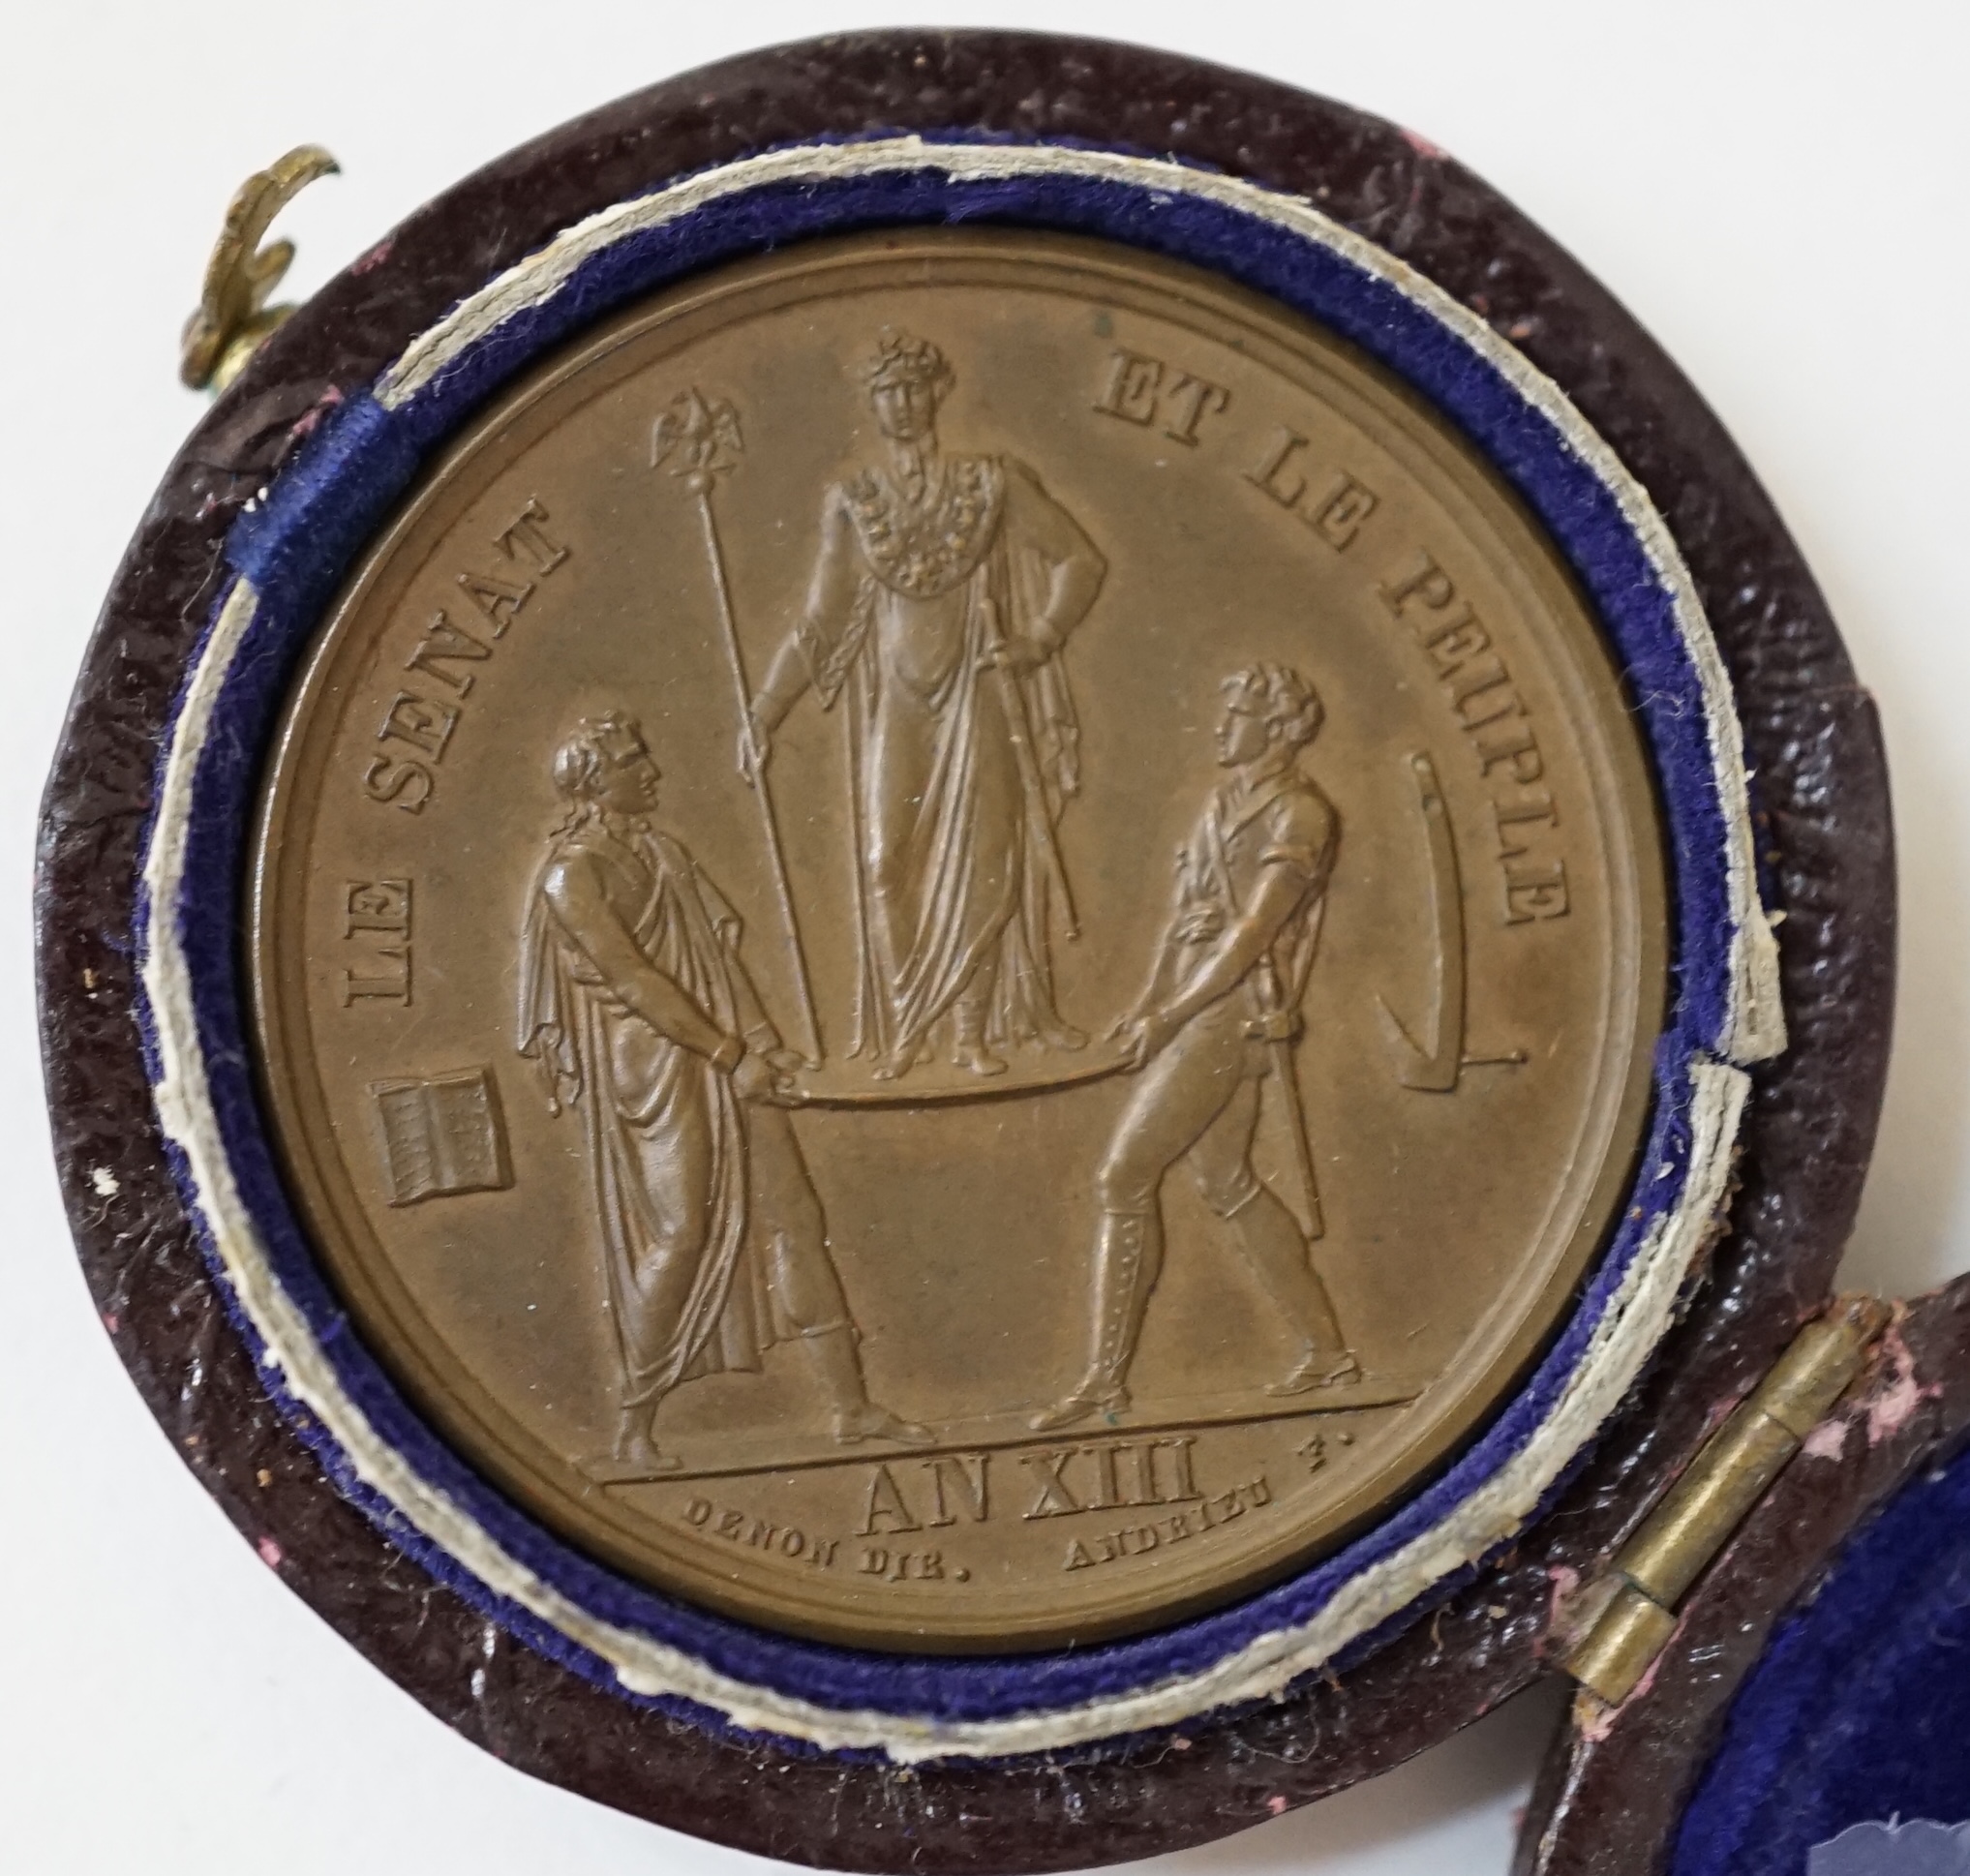 France, Coronation of Napoleon, 1804, a bronze medal by Droz & Jeuffroy, 40mm, in leather case (Bramsen 326)